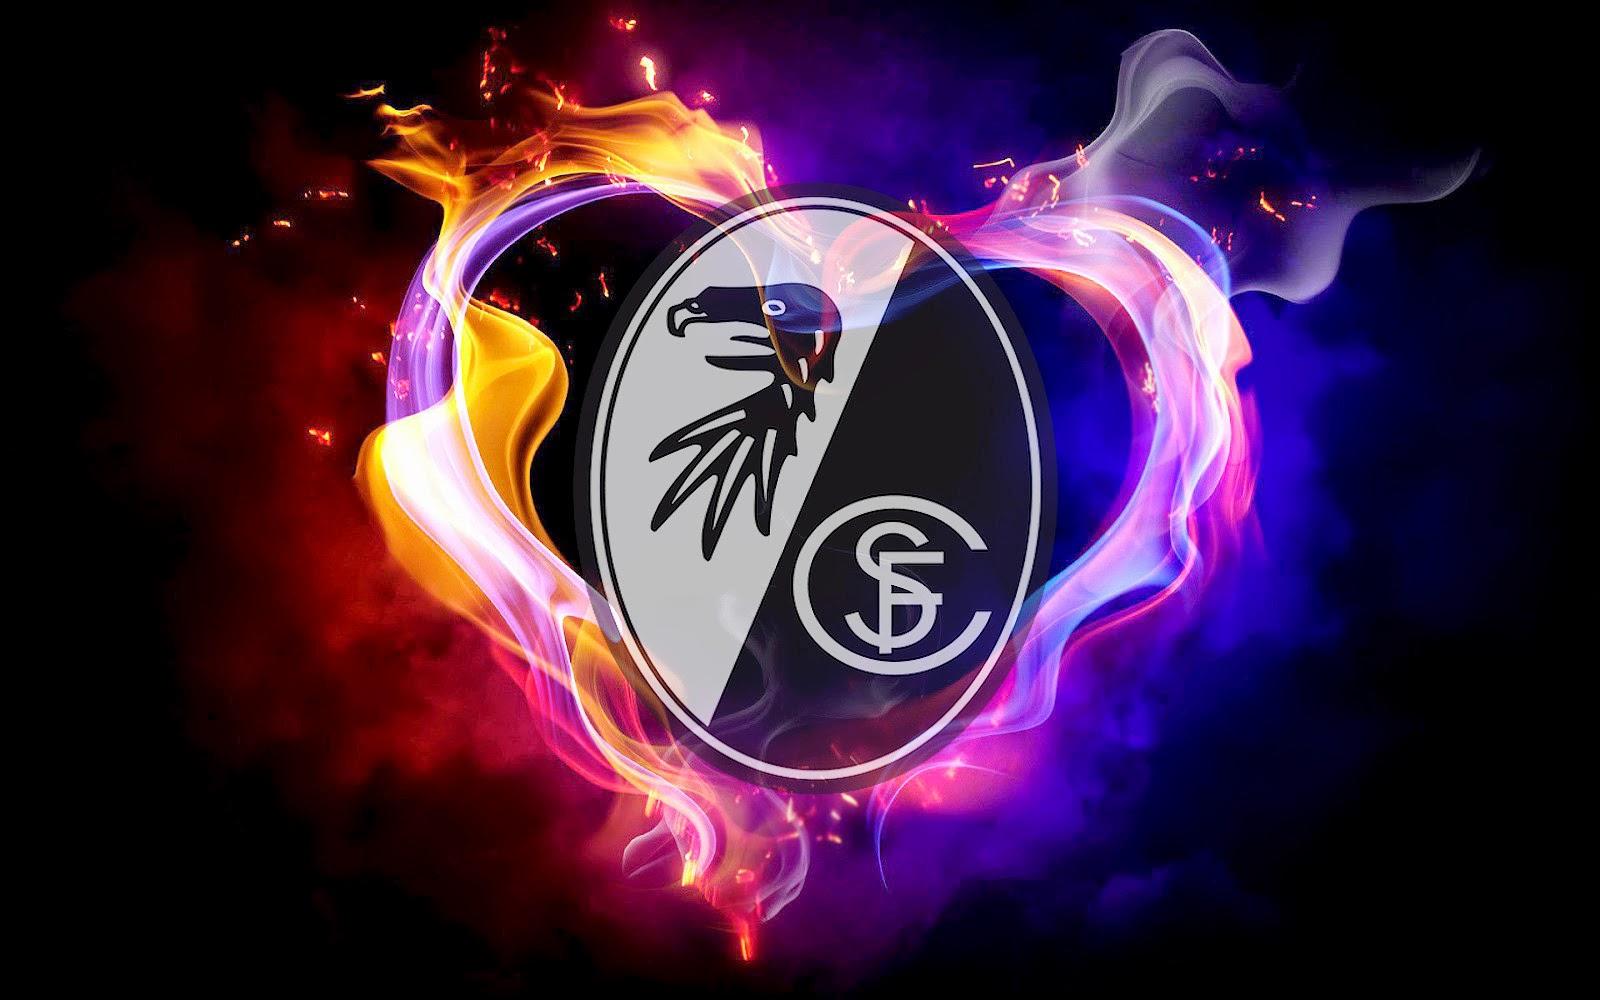 Download wallpapers SC Freiburg golden logo Bundesliga black metal  background football Freiburg FC german football club SC Freiburg logo  soccer Germany for desktop with resolution 2880x1800 High Quality HD  pictures wallpapers